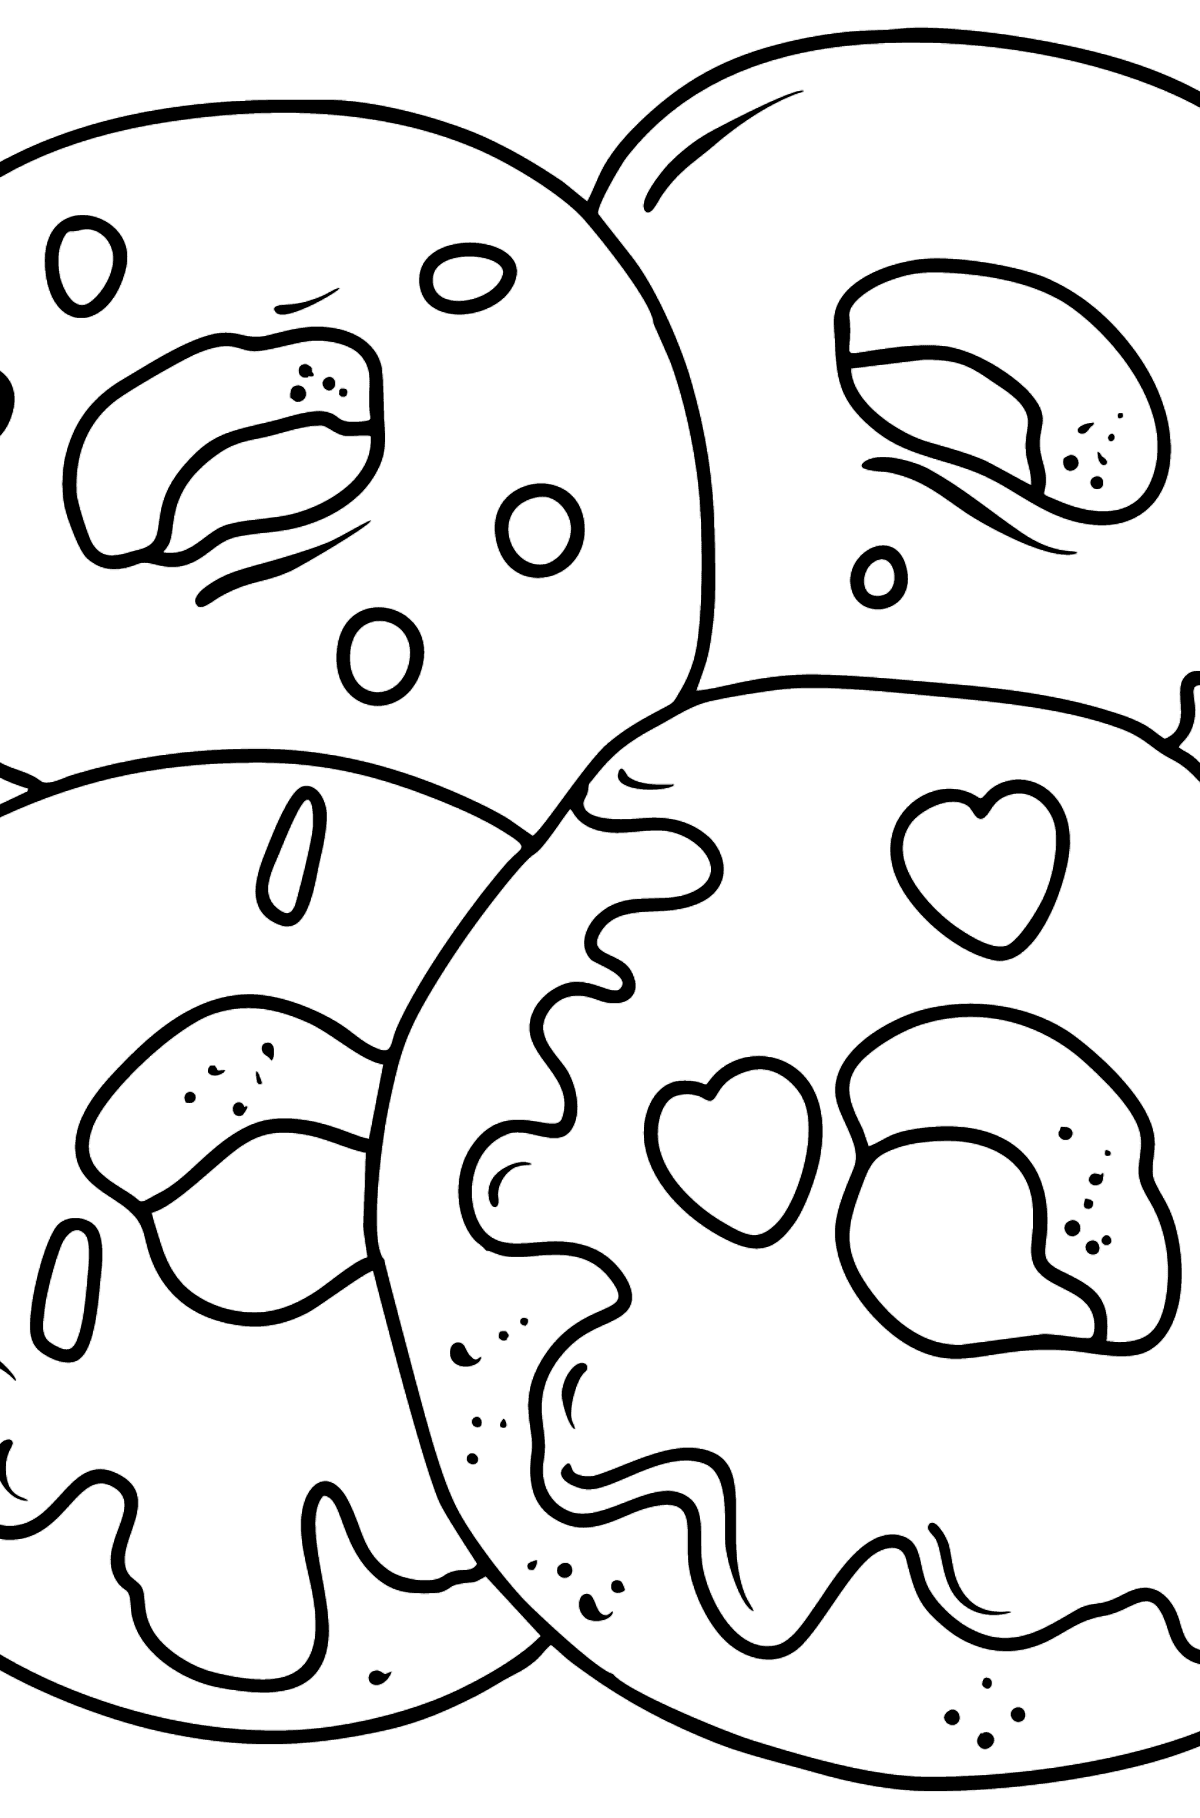 Donuts coloring page - Coloring Pages for Kids